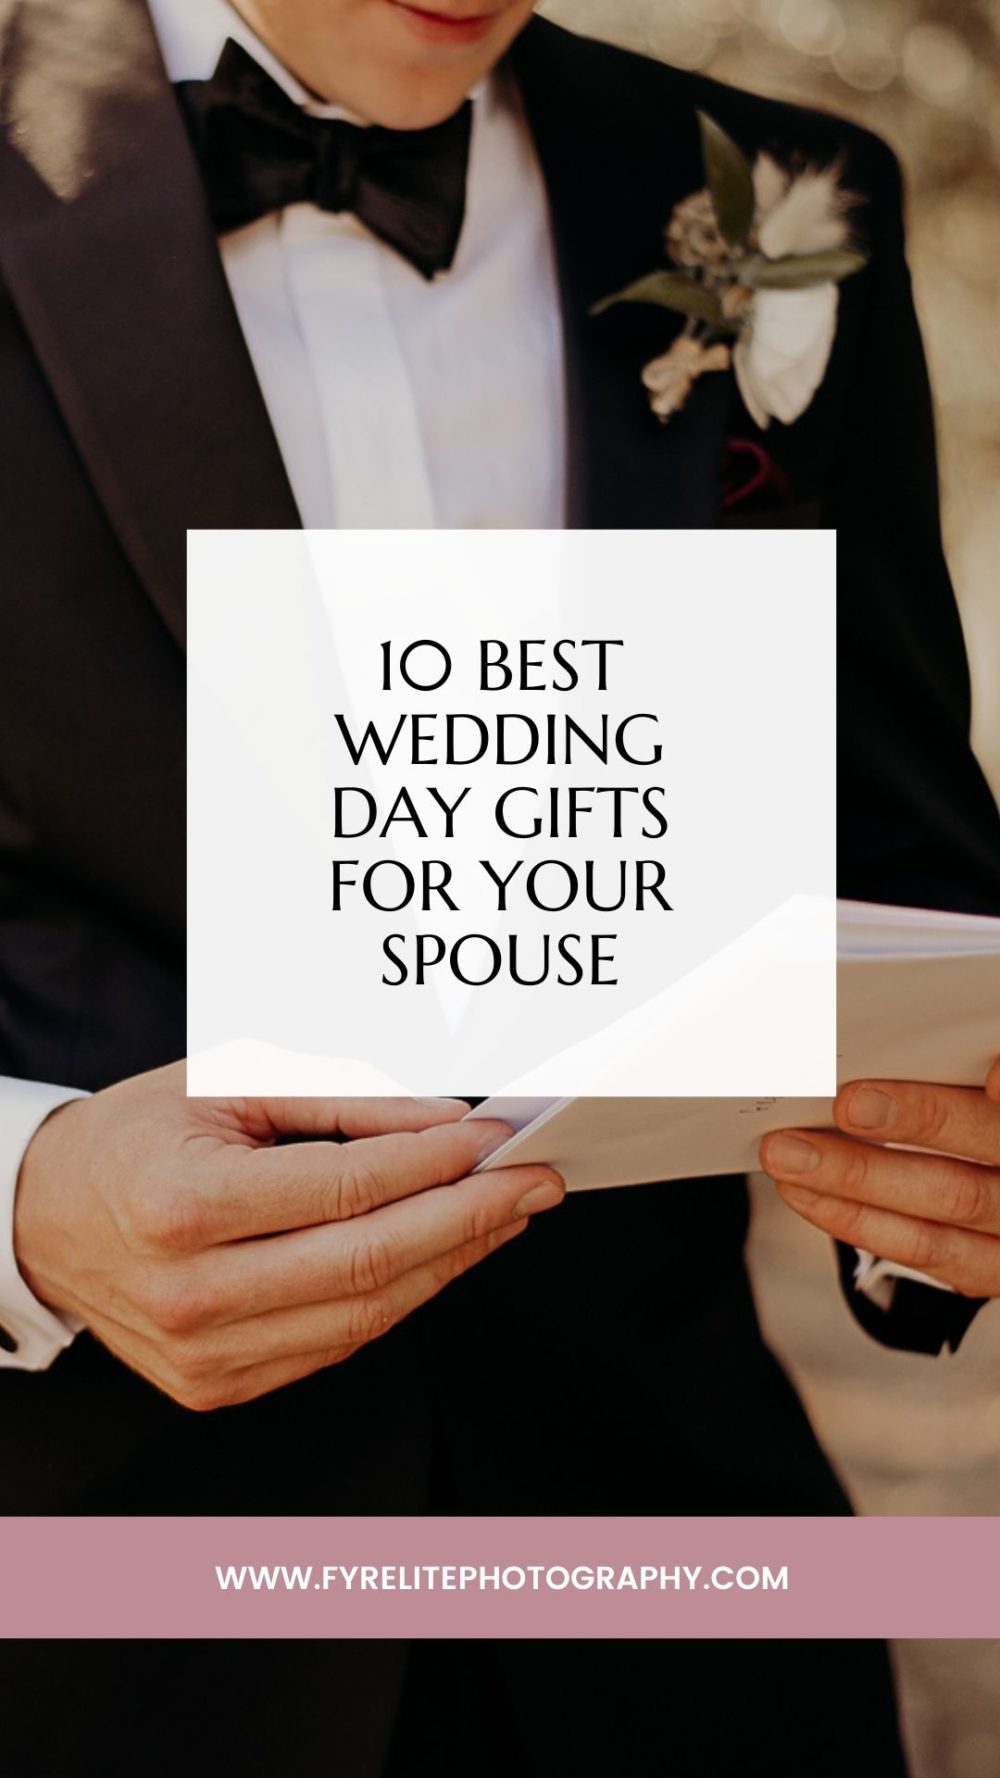 10 Best Wedding Day Gifts For Your Spouse​